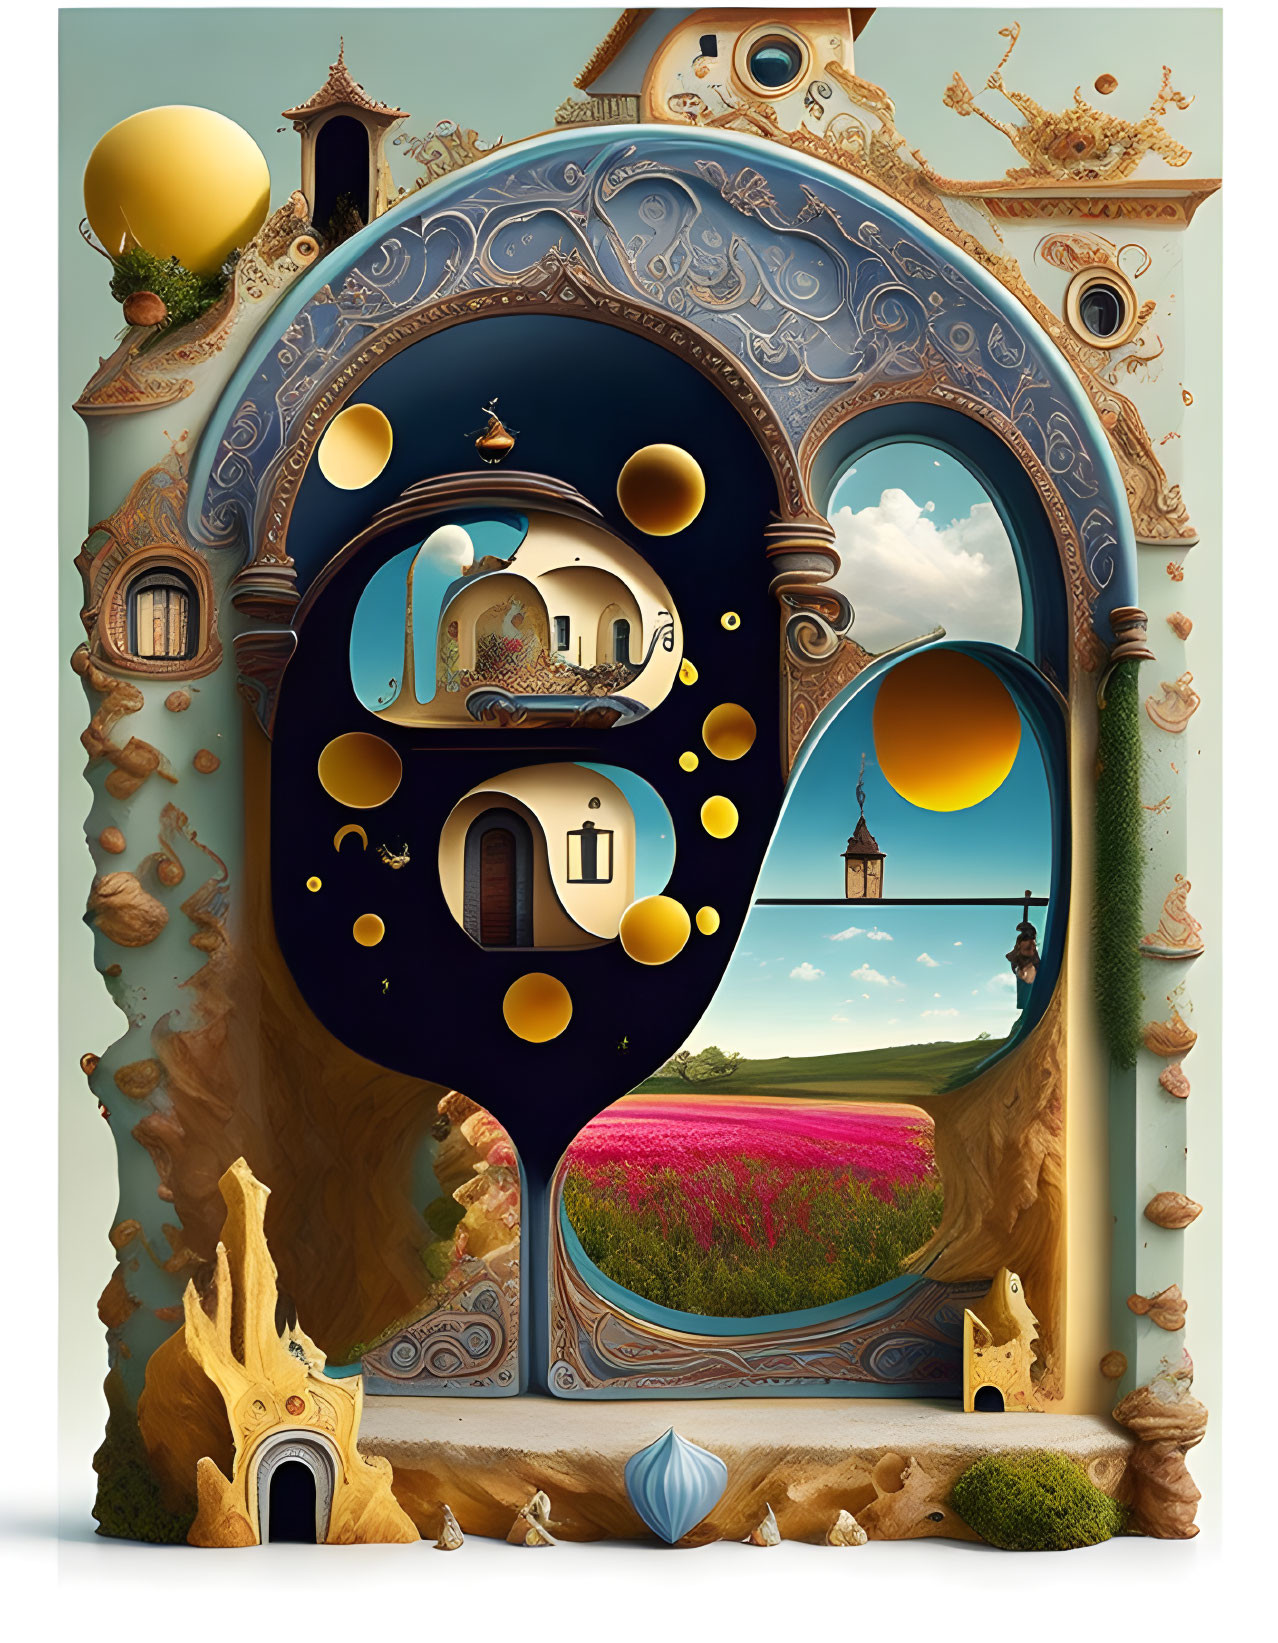 Surreal artwork: Building with yin yang, whimsical architecture, floating elements